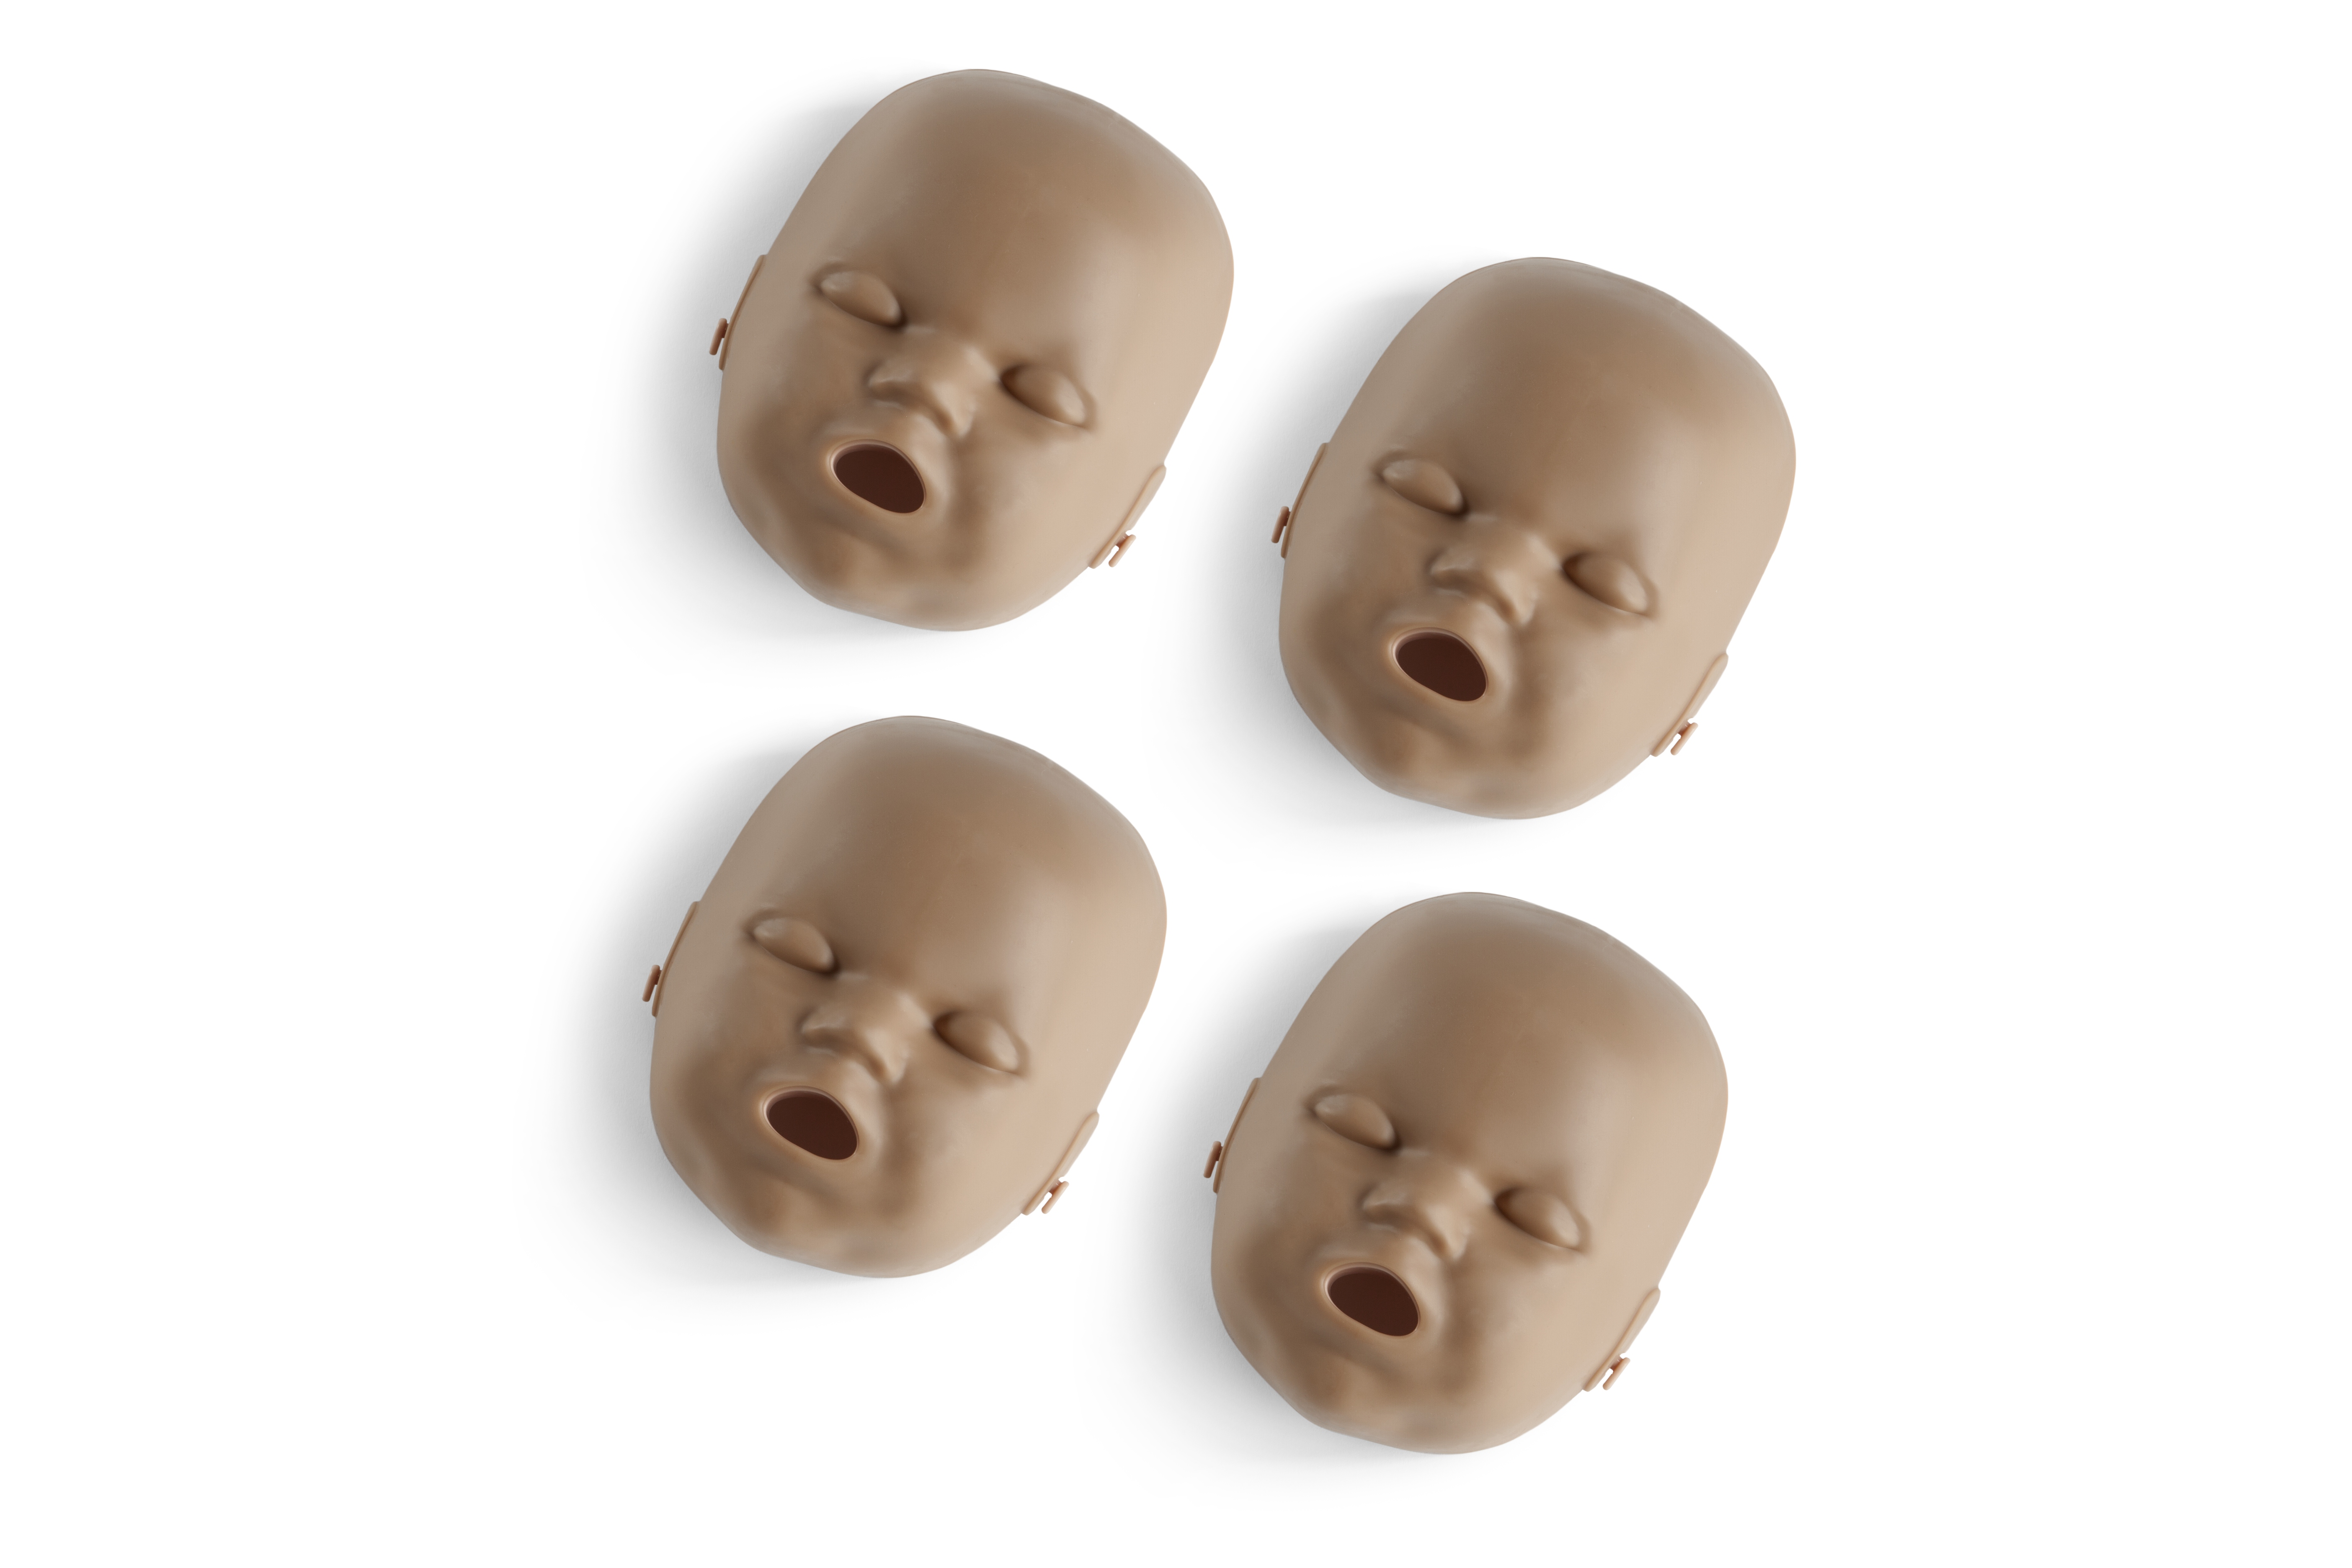 Face skin replacements for the Prestan Professional Infant manikin 4-Pack